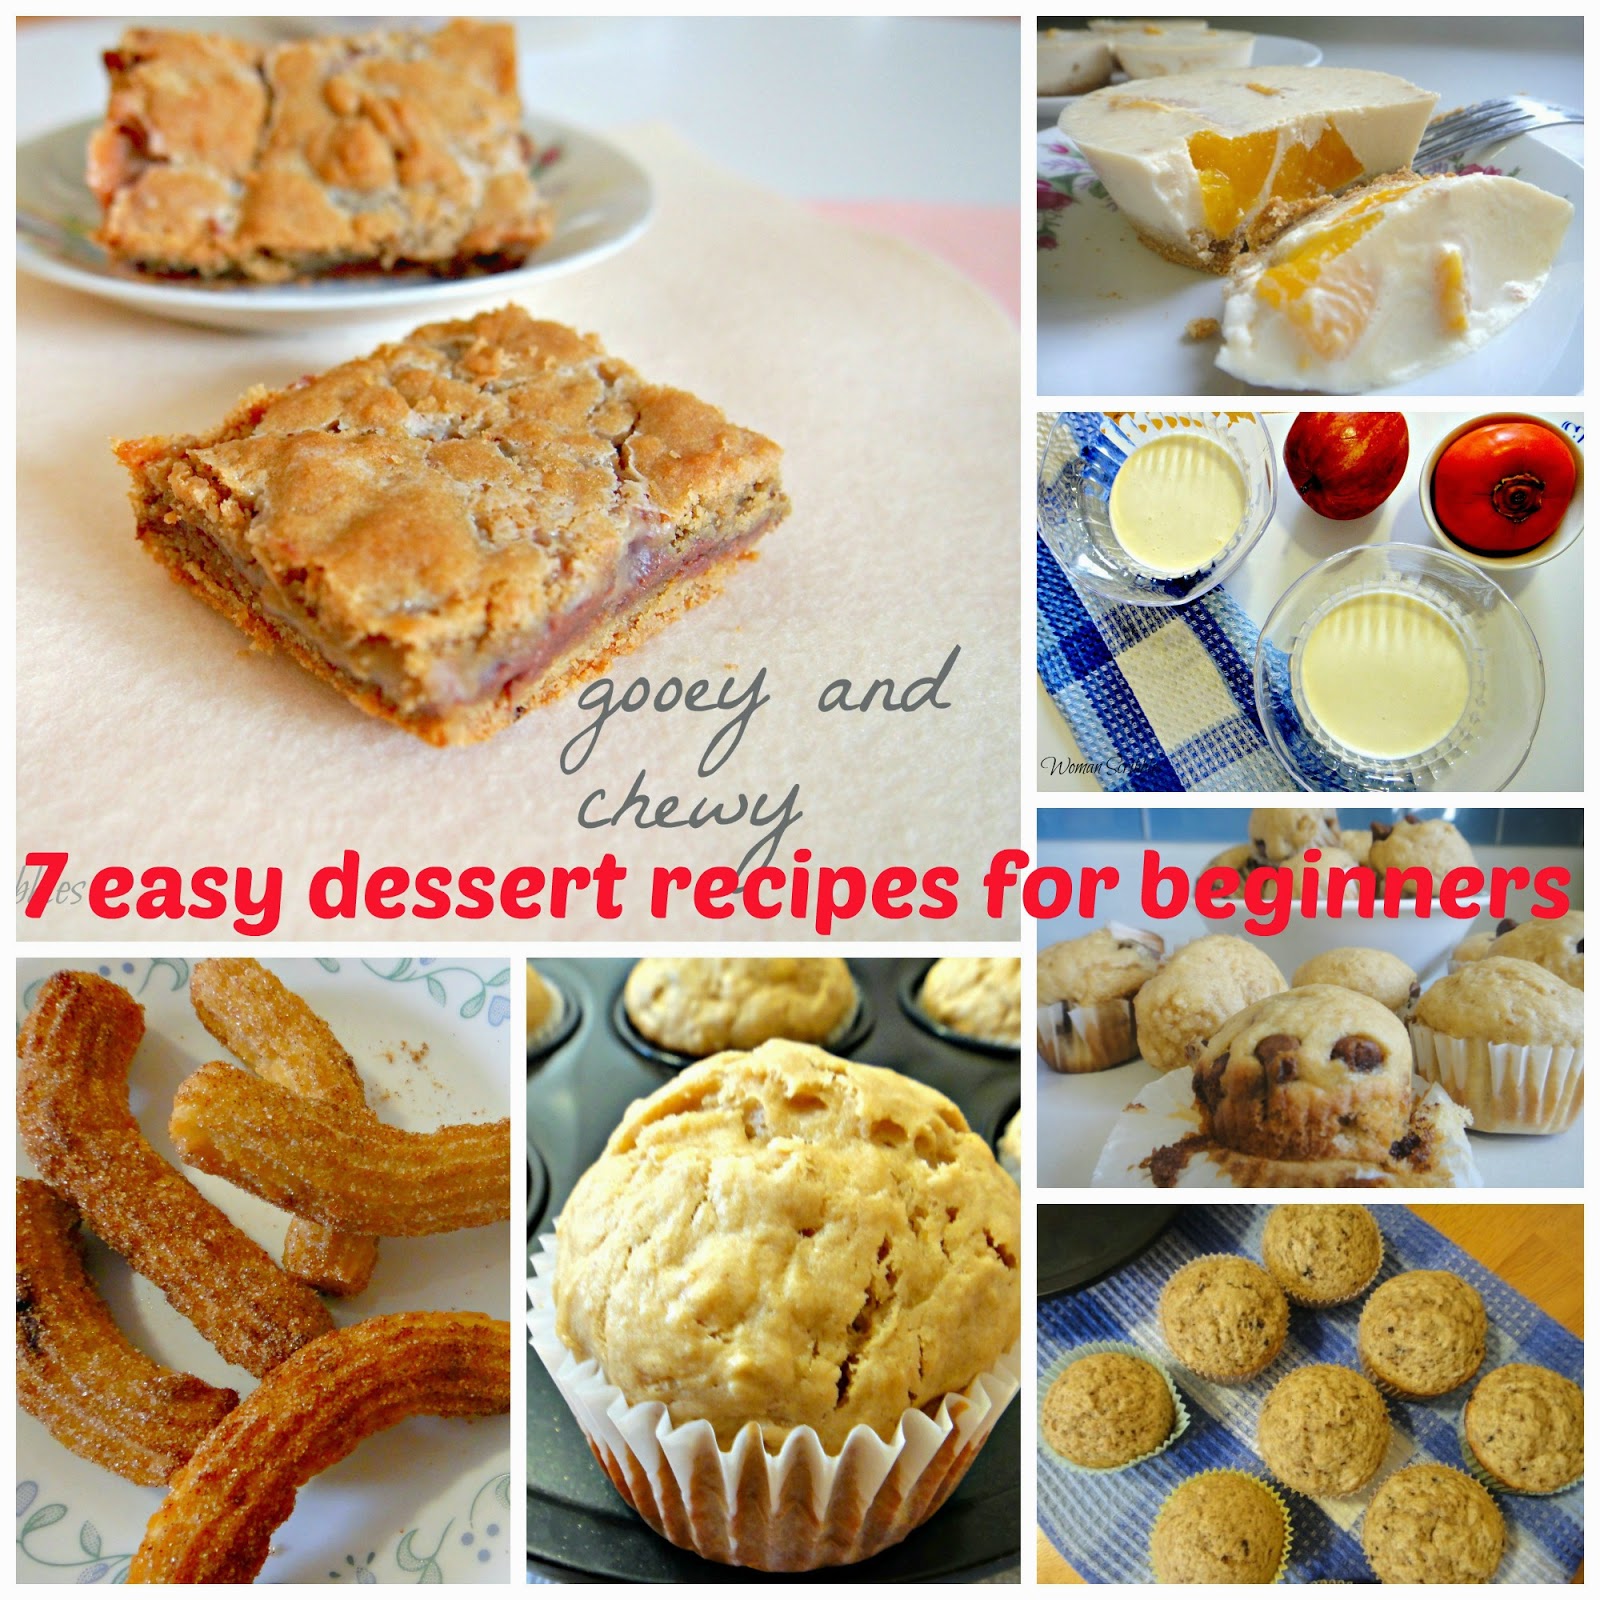 Woman Scribbles: 7 Easy Dessert Recipes For Beginners